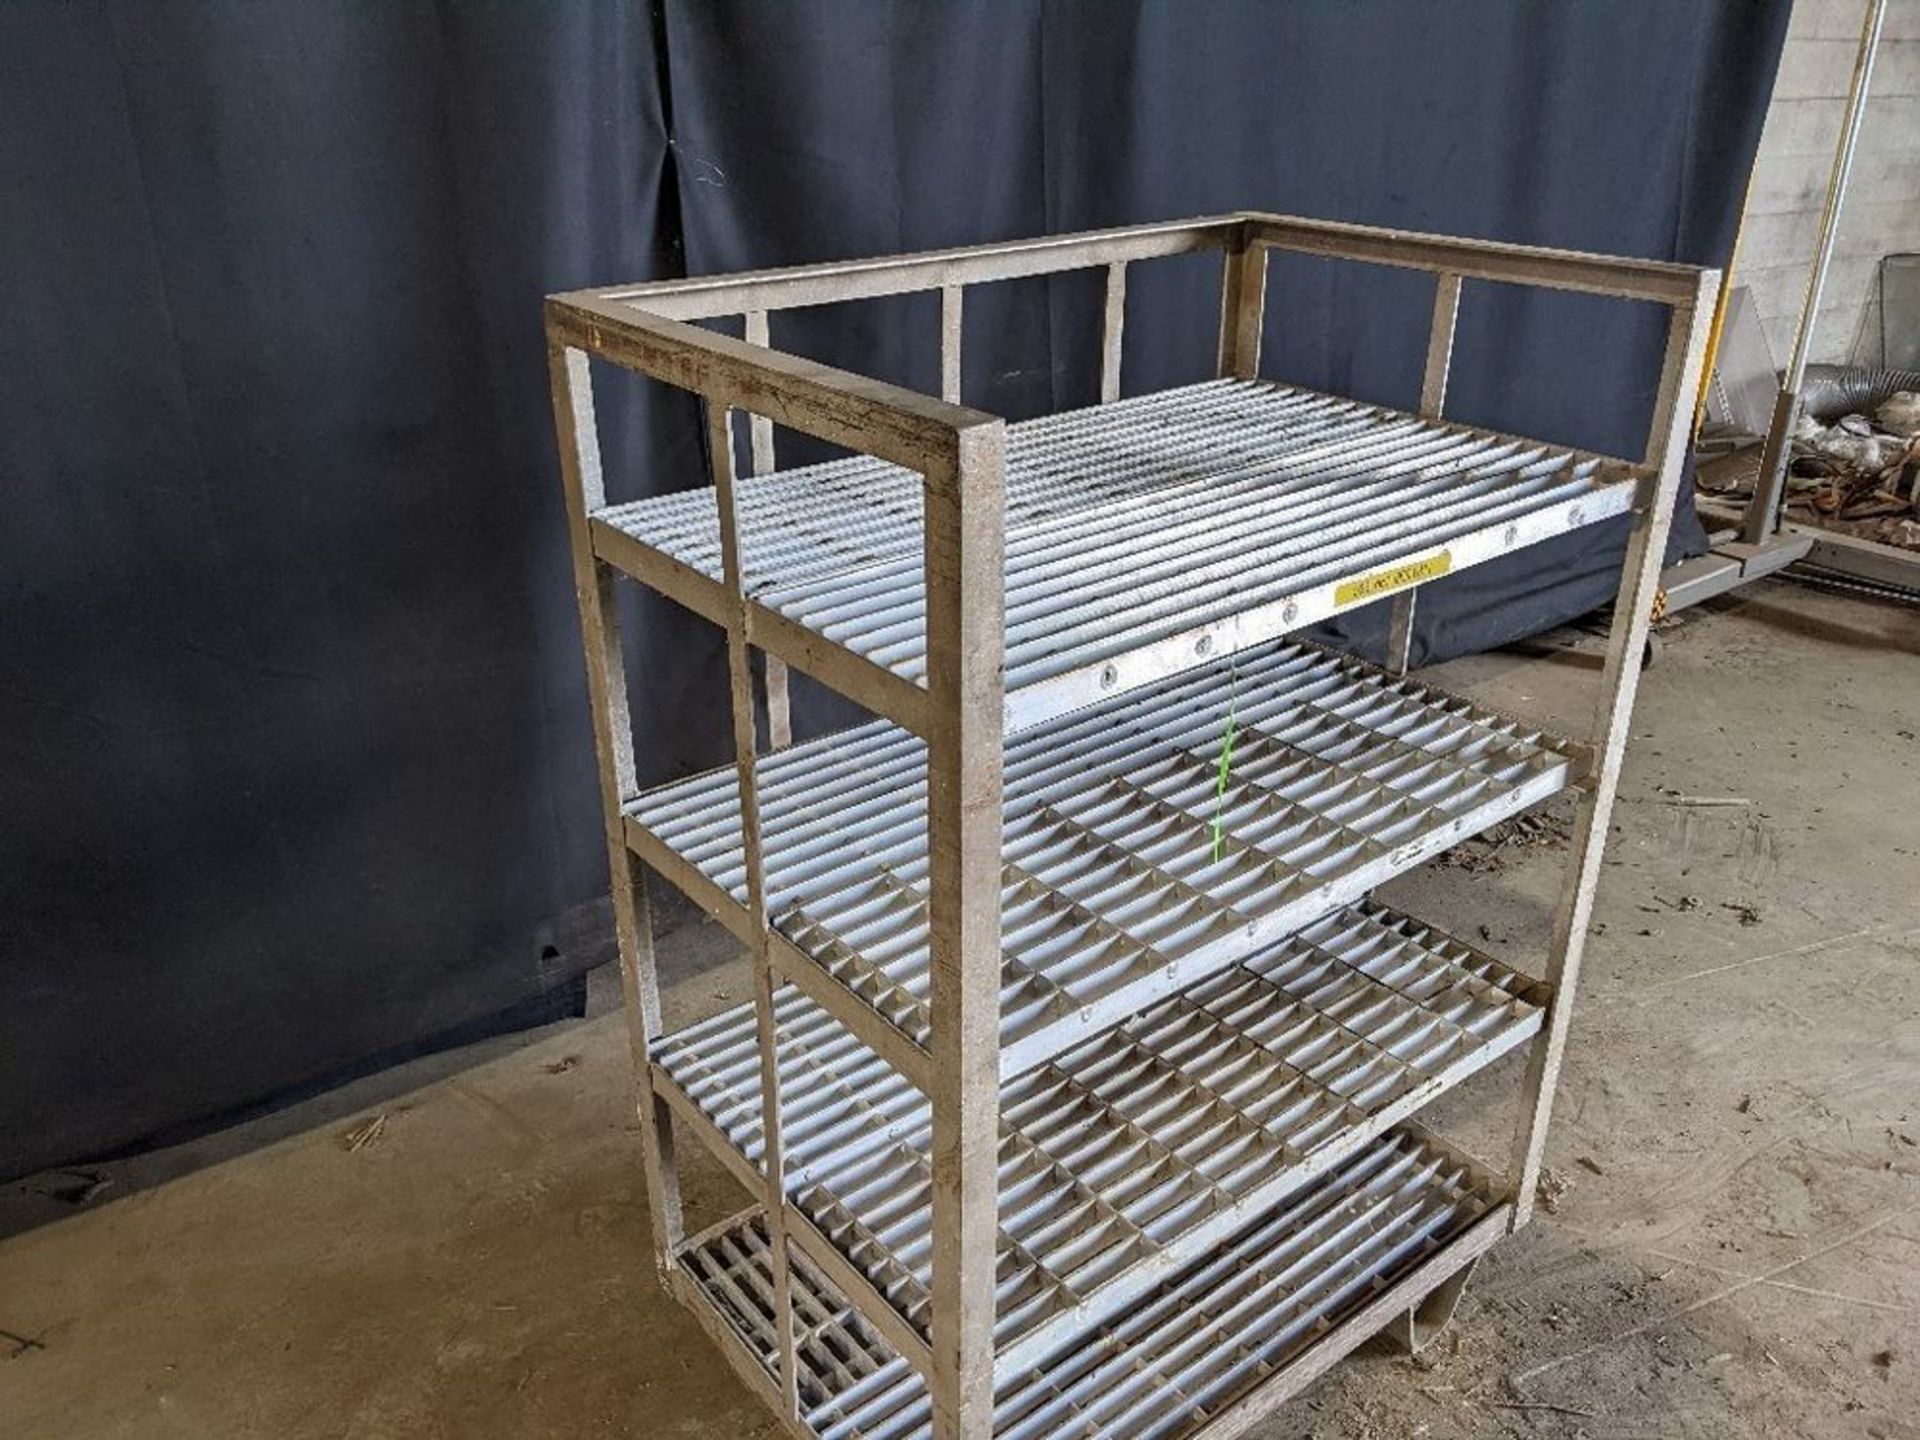 Qty (1) Metal Rack - 36"L x 24"W x 51"H, Model N/A, S/N N/A - Image 2 of 3